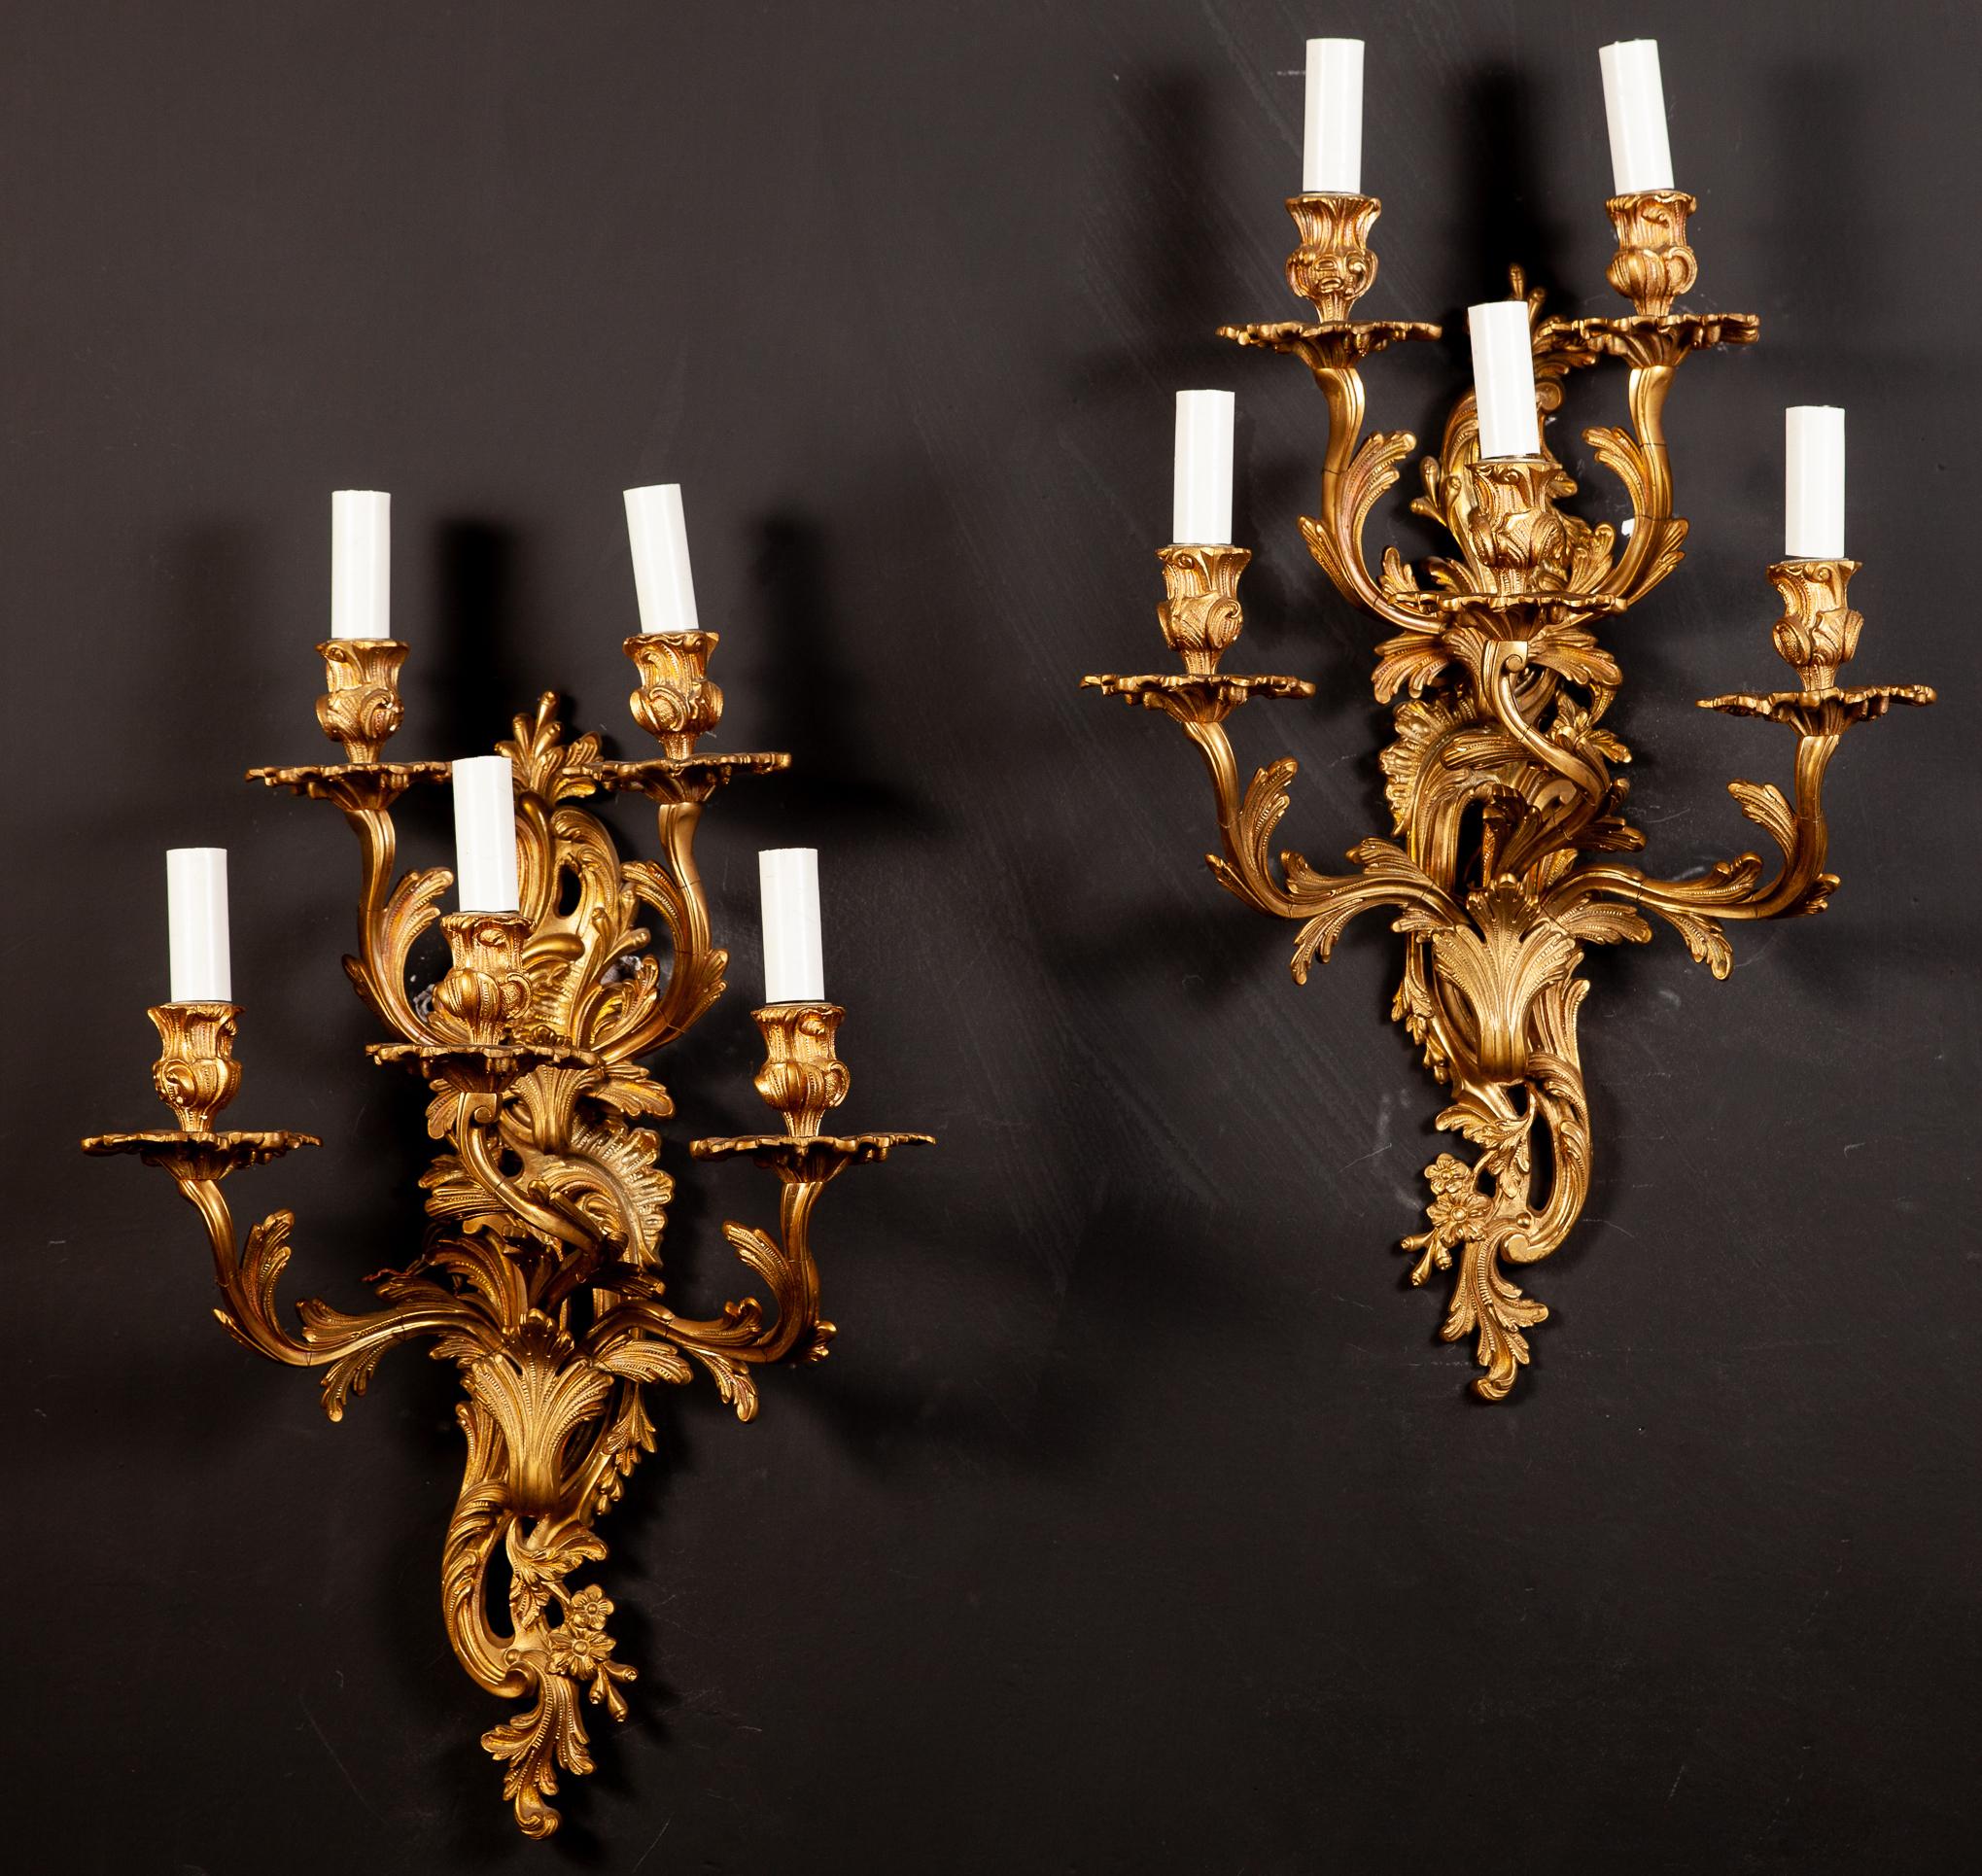 A Pair of French imposing 19th century Louis XV style gilt bronze five-light sconces , scrolling arms with acanthus leaves terminating in a corolla with foliate scrolls. Available two pairs. 
 Each sconces with Five E 14 light bulbs . On request we